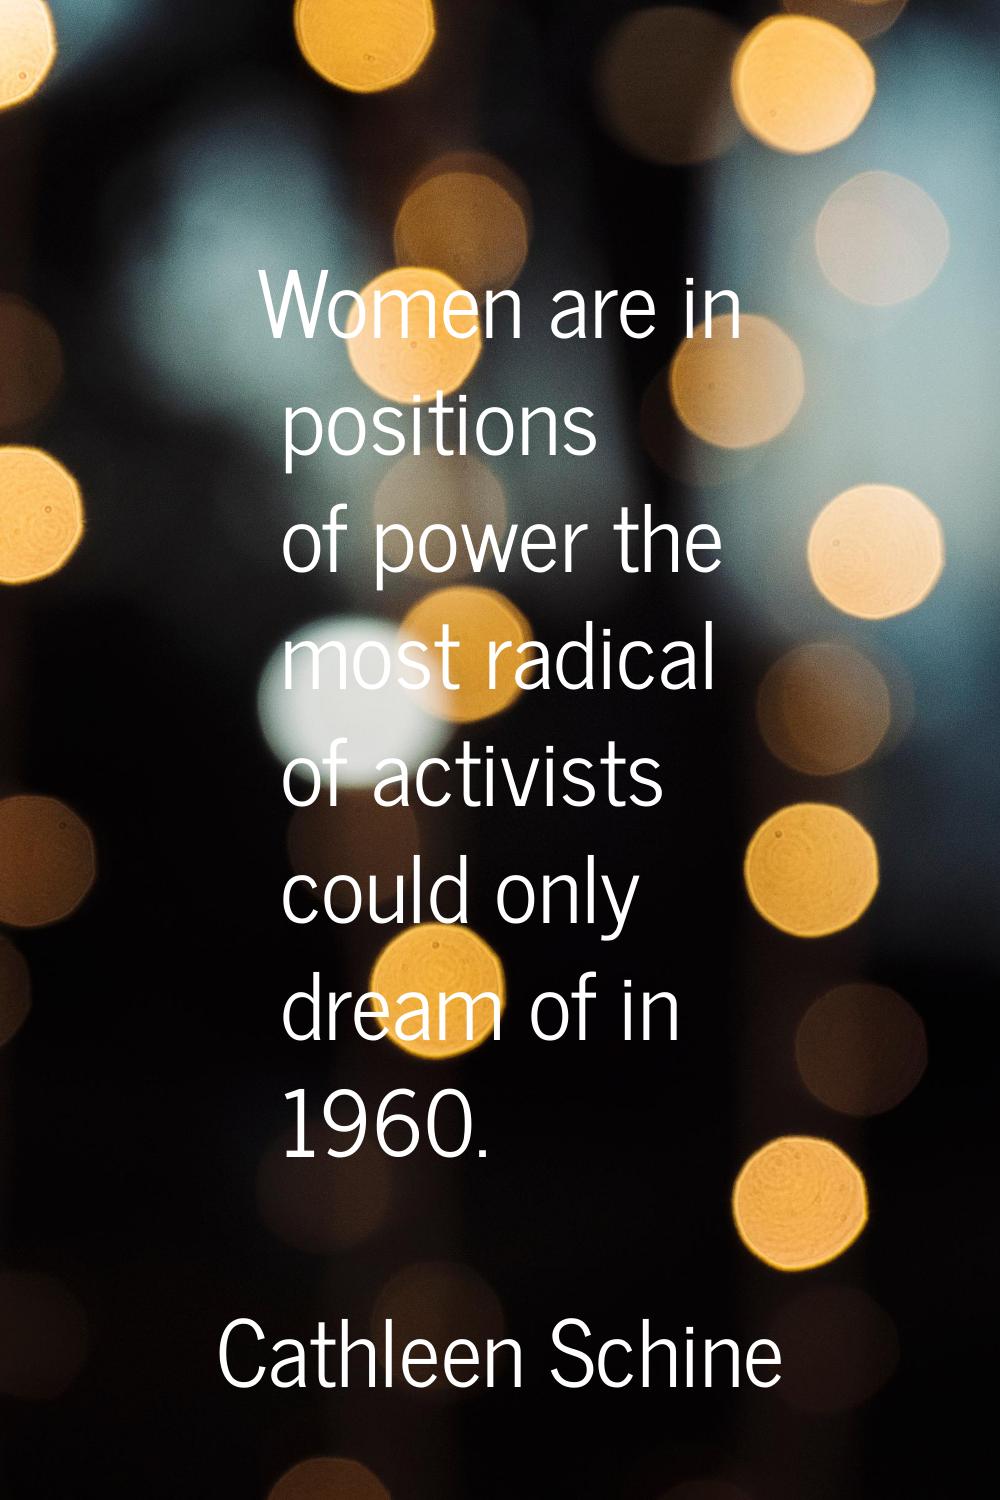 Women are in positions of power the most radical of activists could only dream of in 1960.